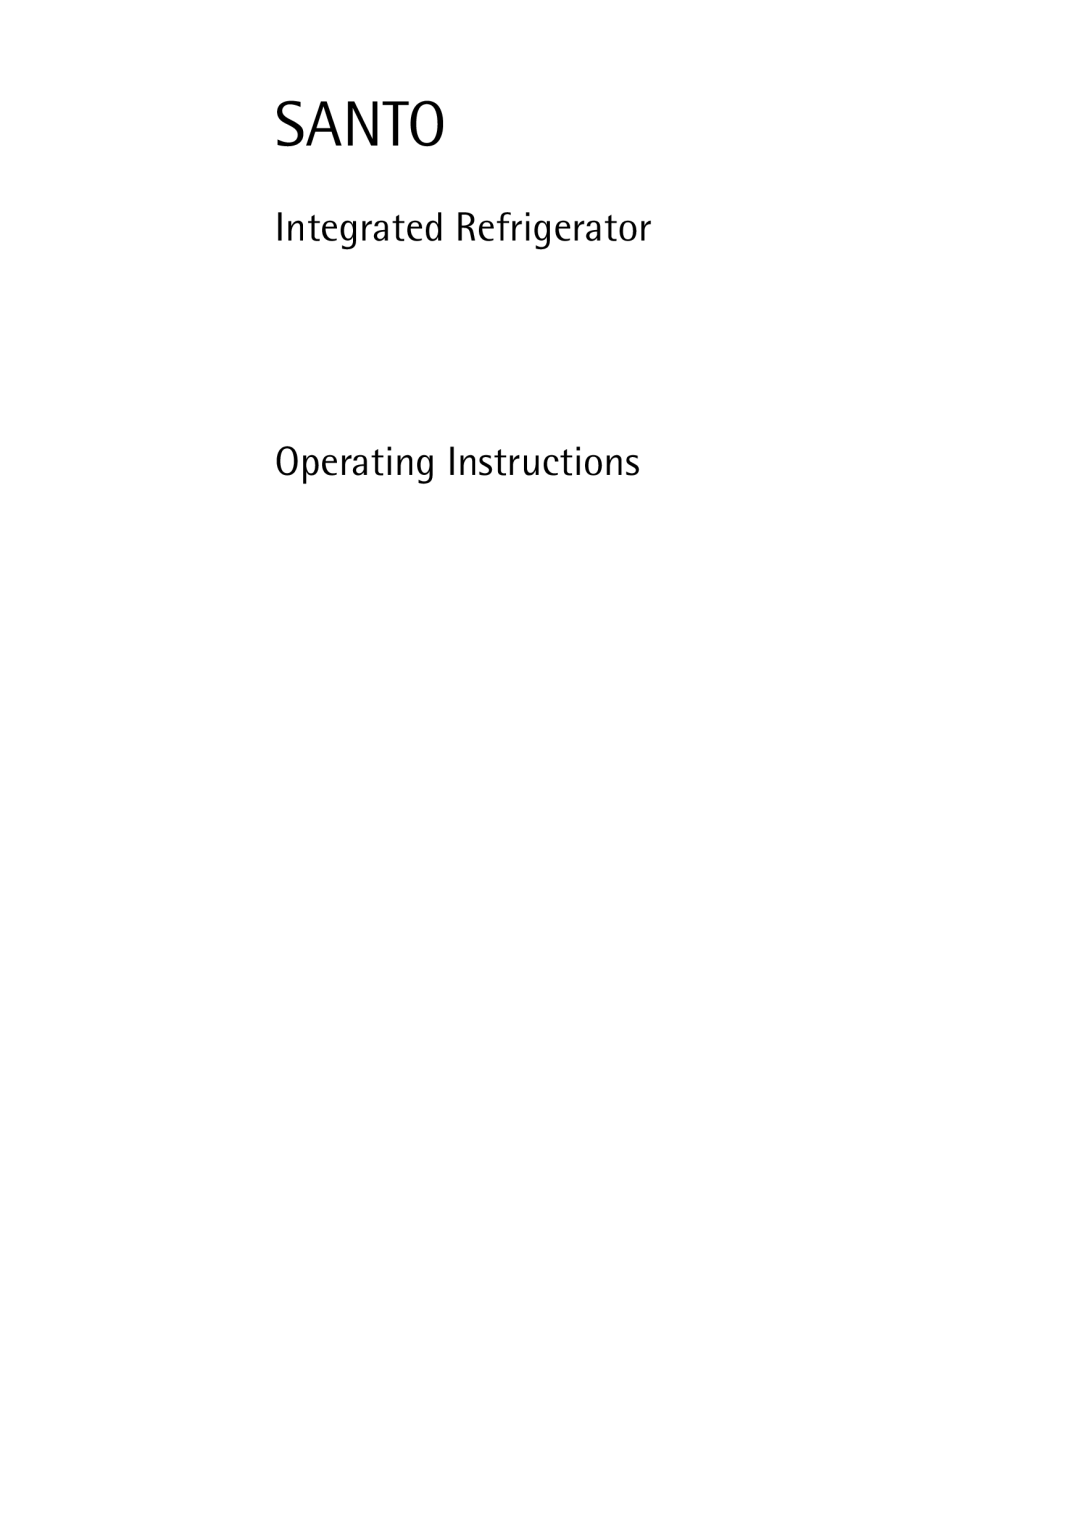 Electrolux operating instructions Santo, Integrated Refrigerator Operating Instructions 